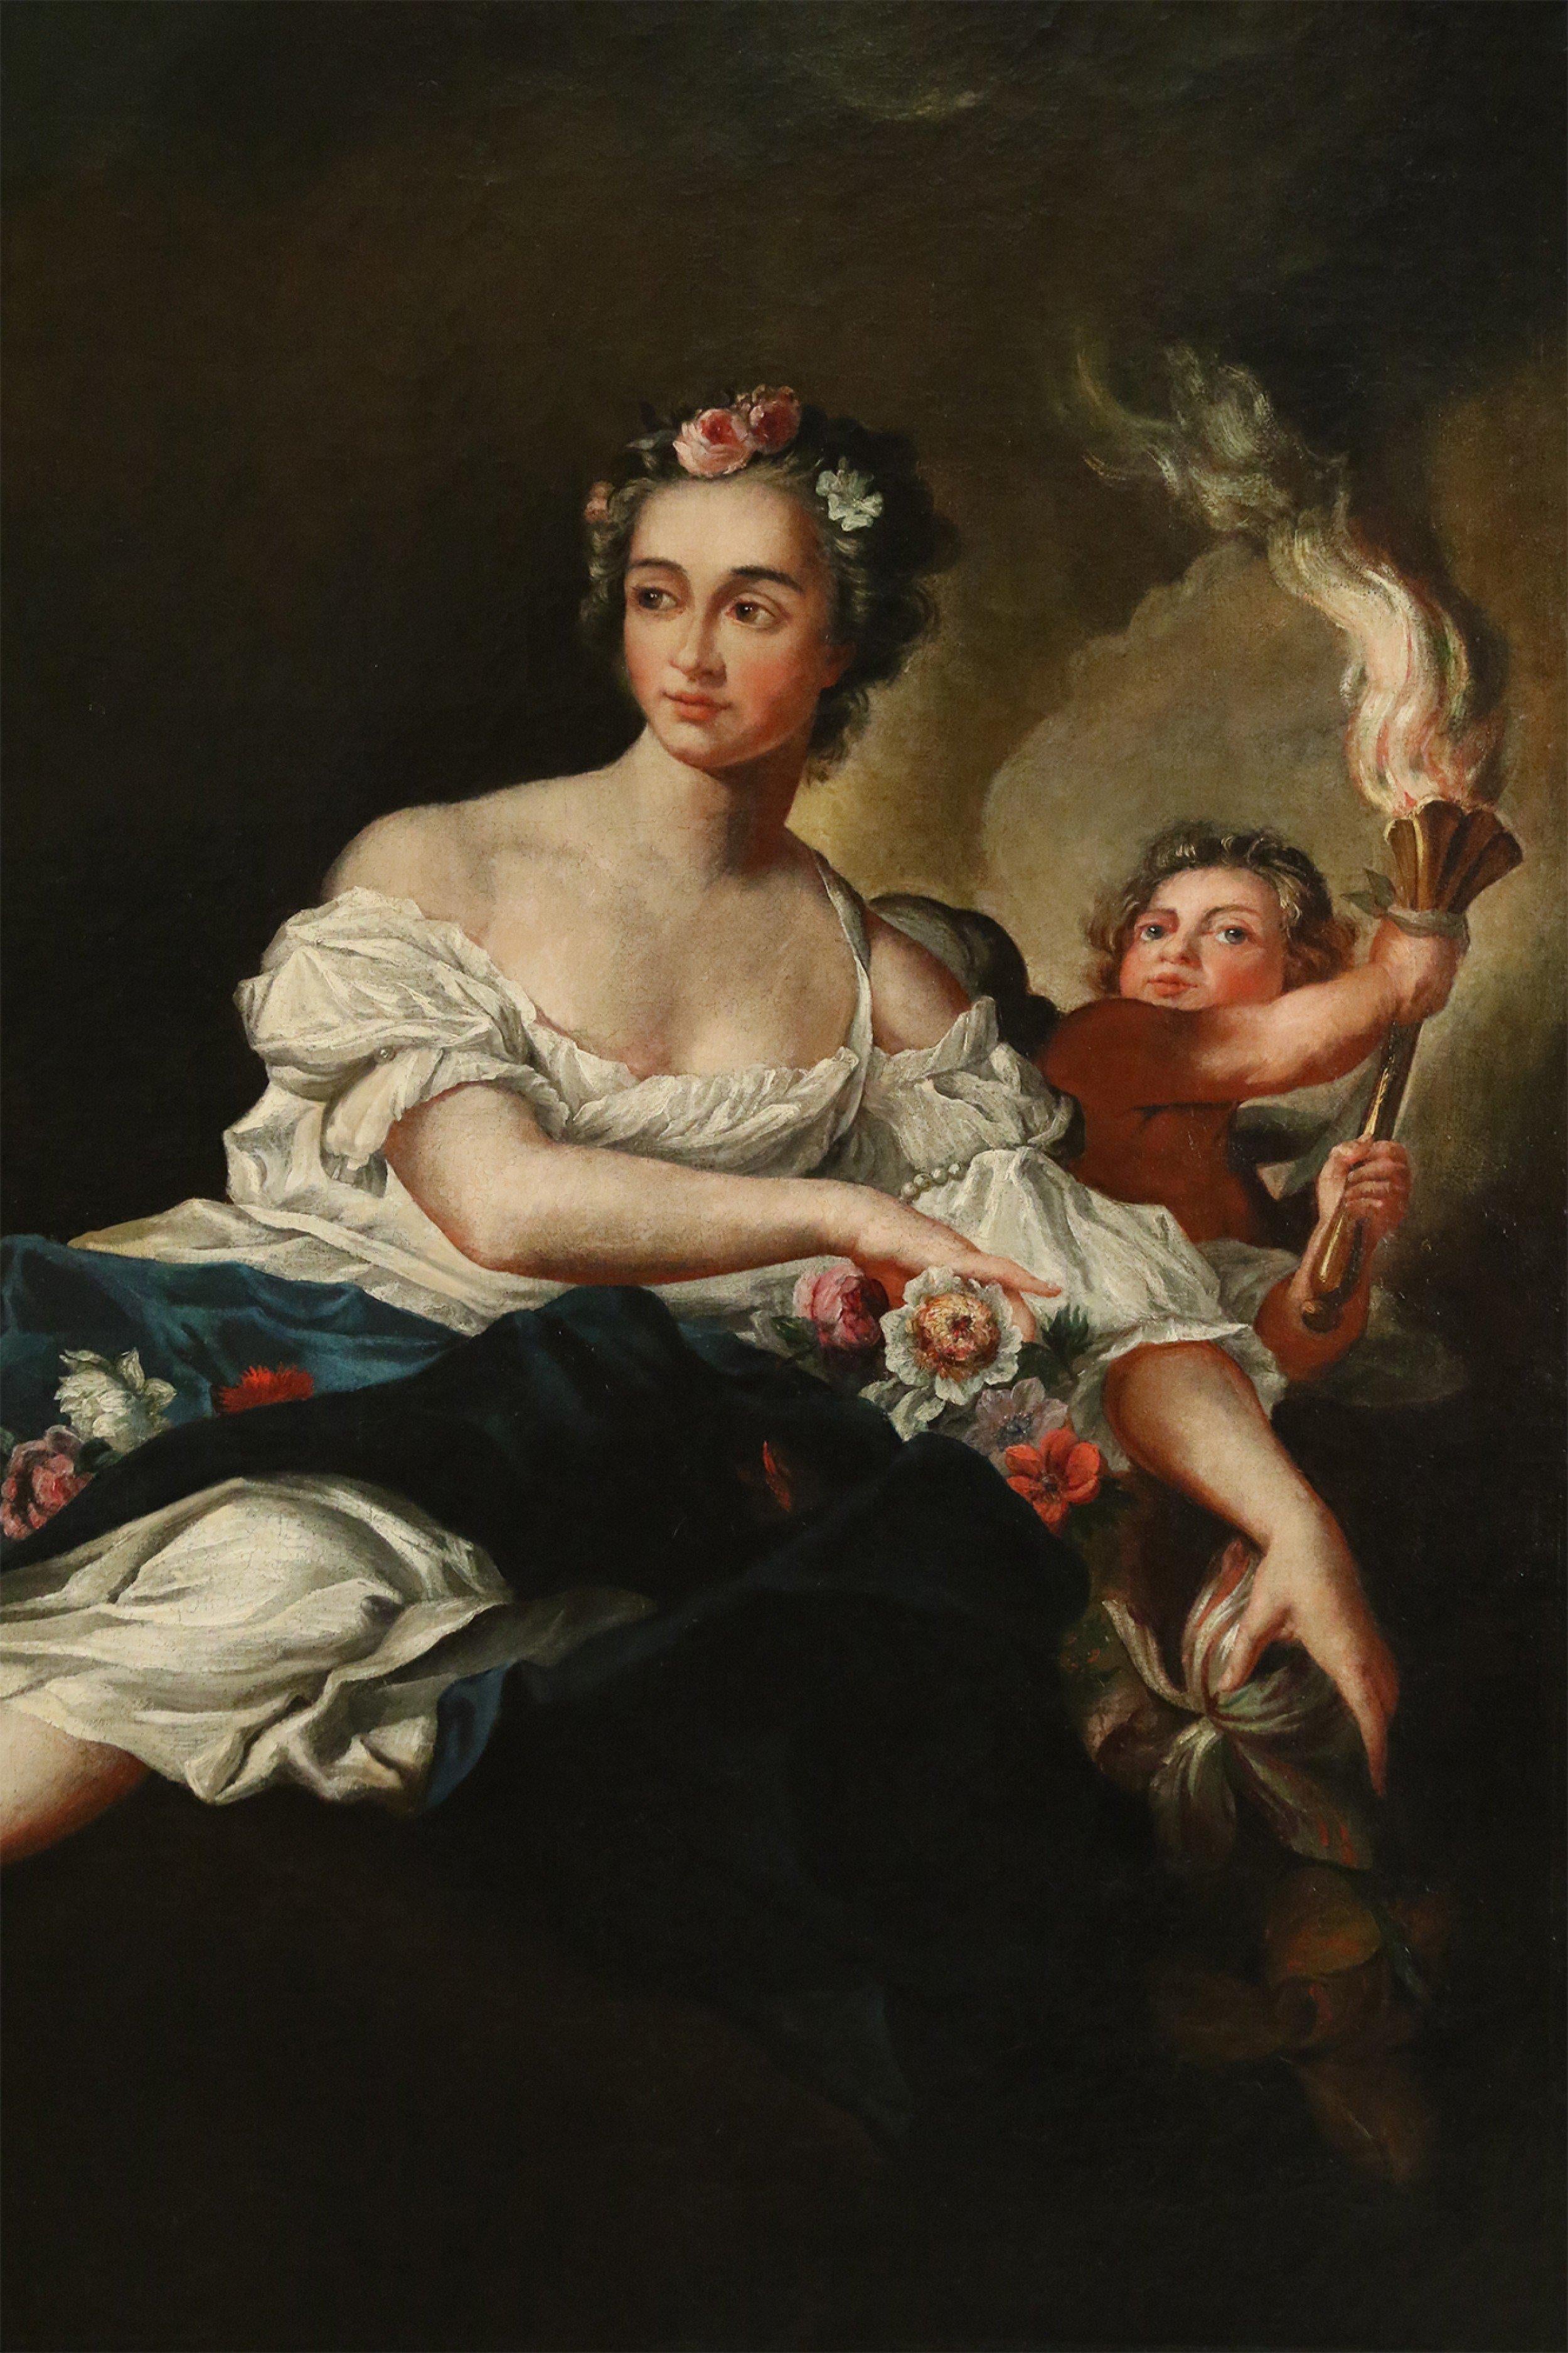 French (18th-19th century) large oil painting portrait of a woman holding flowers and a child bearing a torch in an ornate carved rectangular giltwood frame.